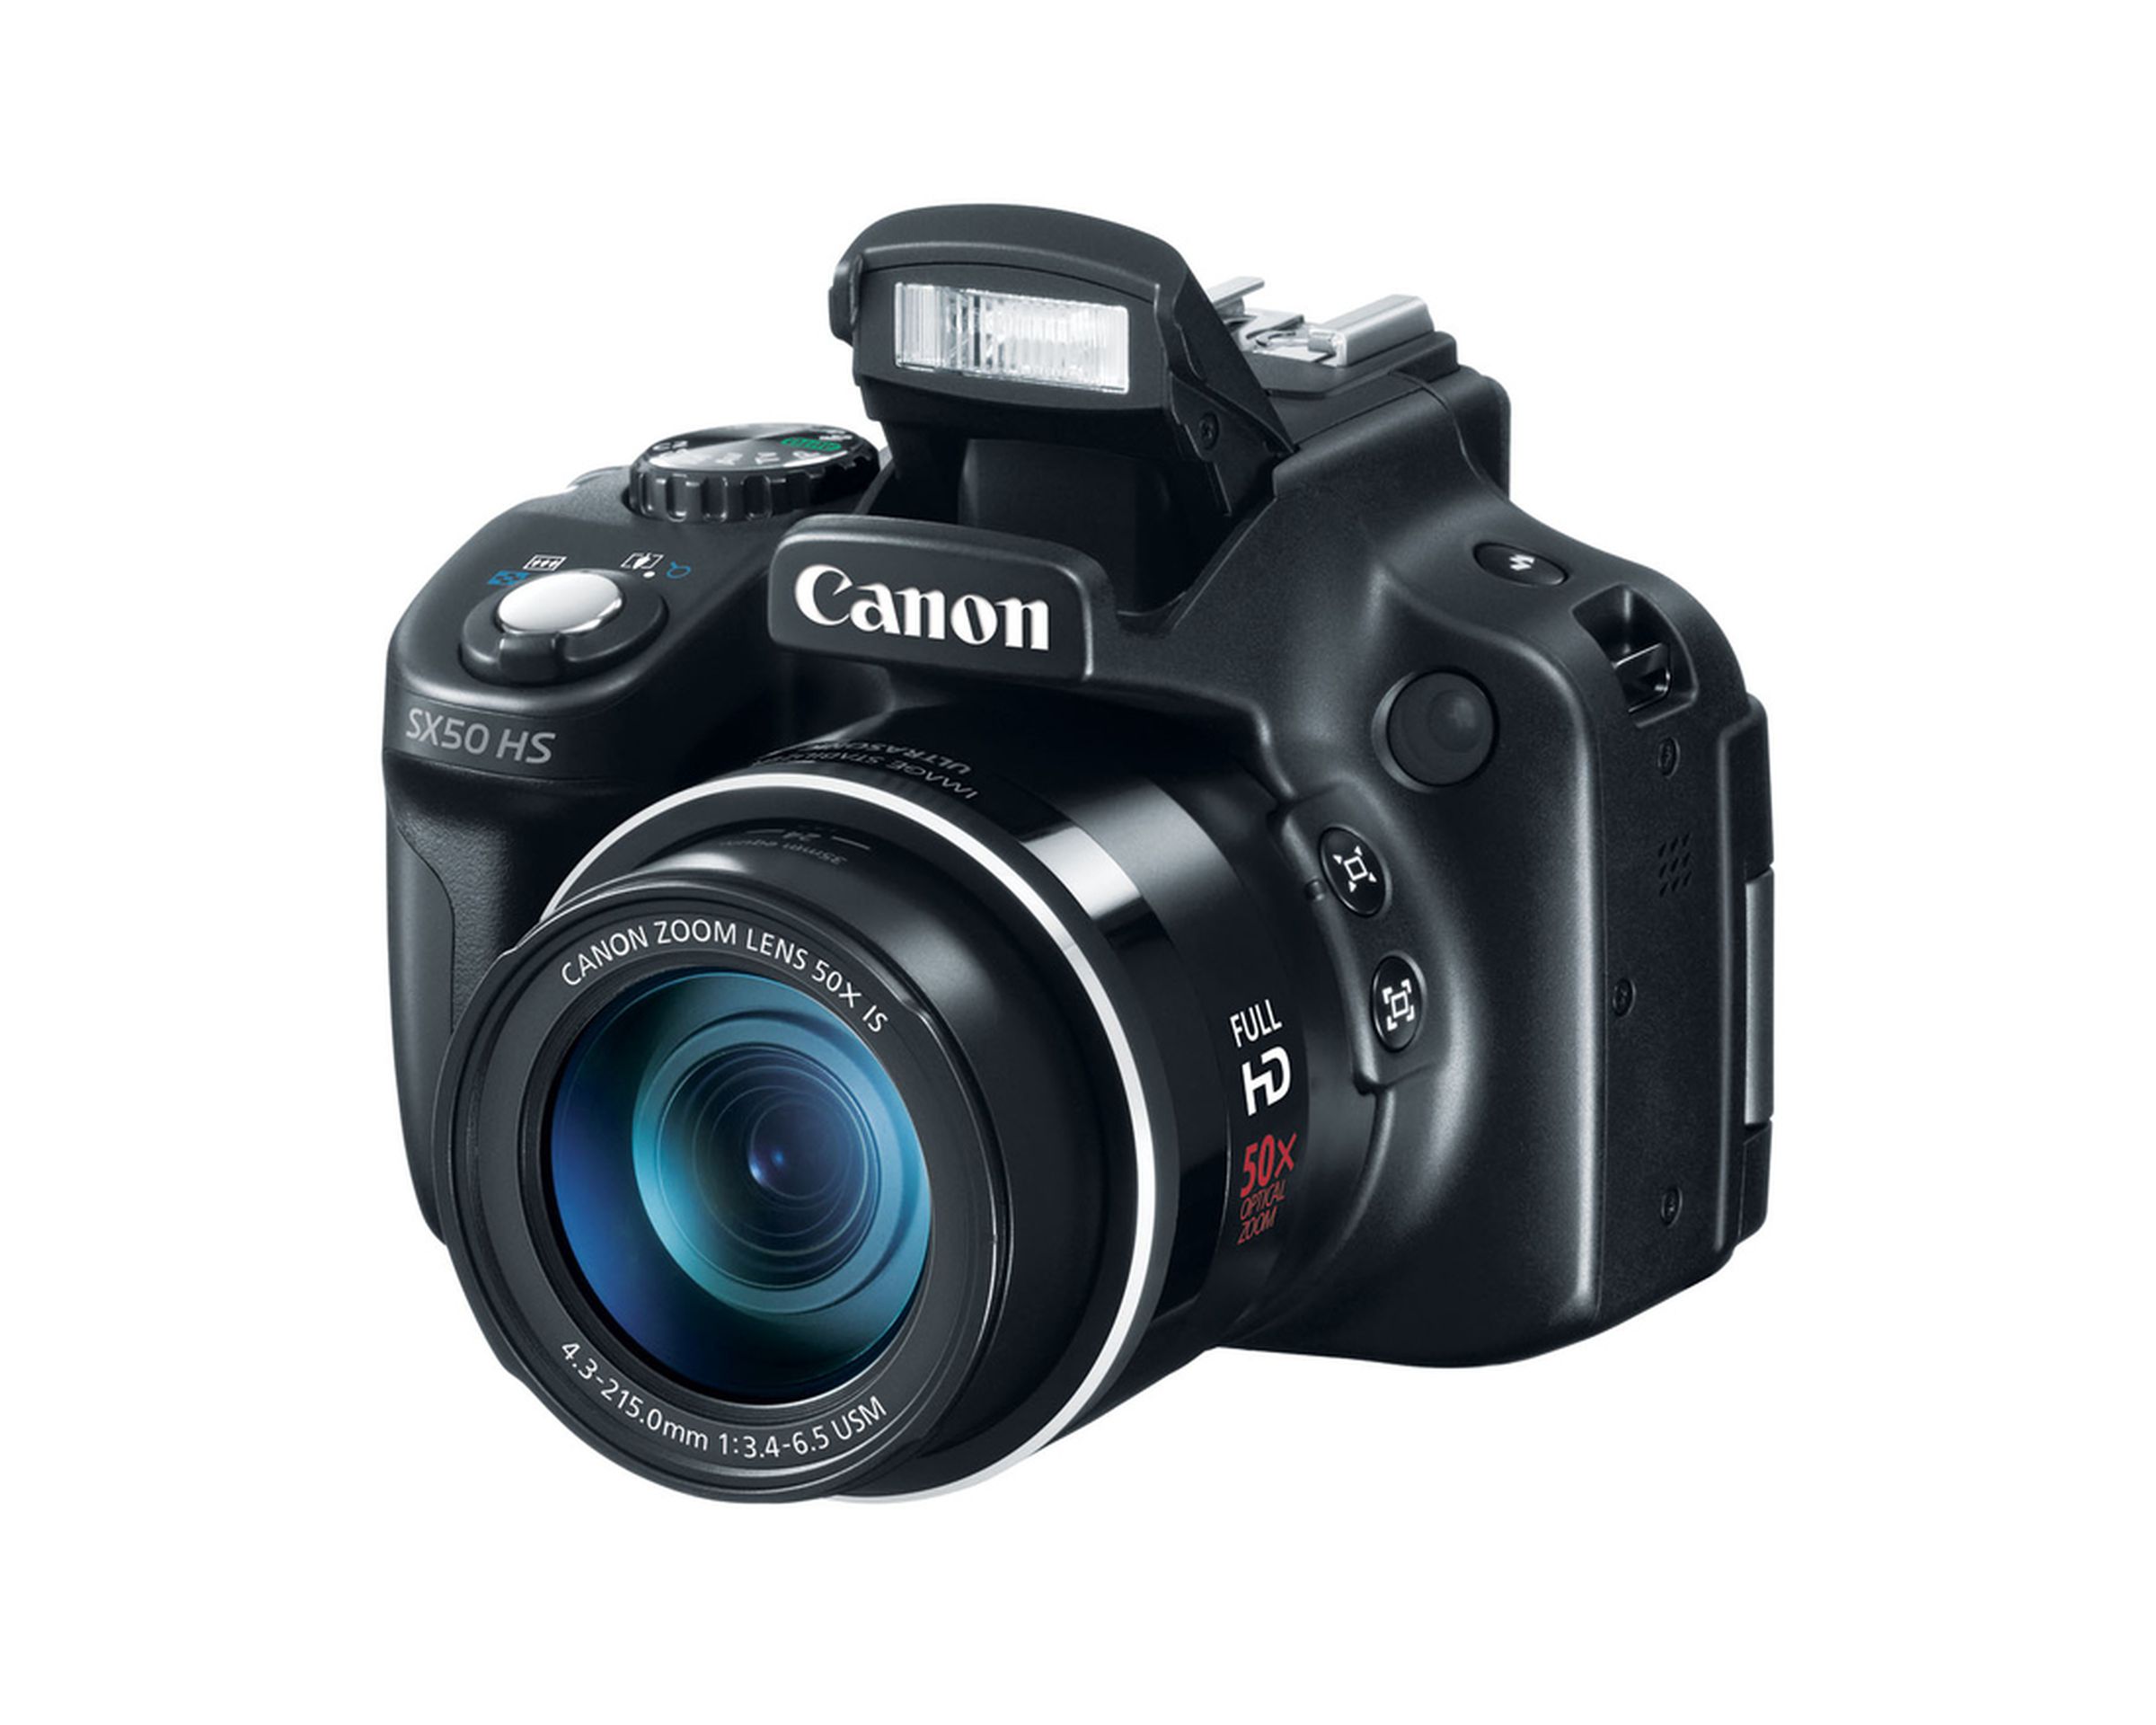 Canon PowerShot G15, S110, and SX50 HS pictures